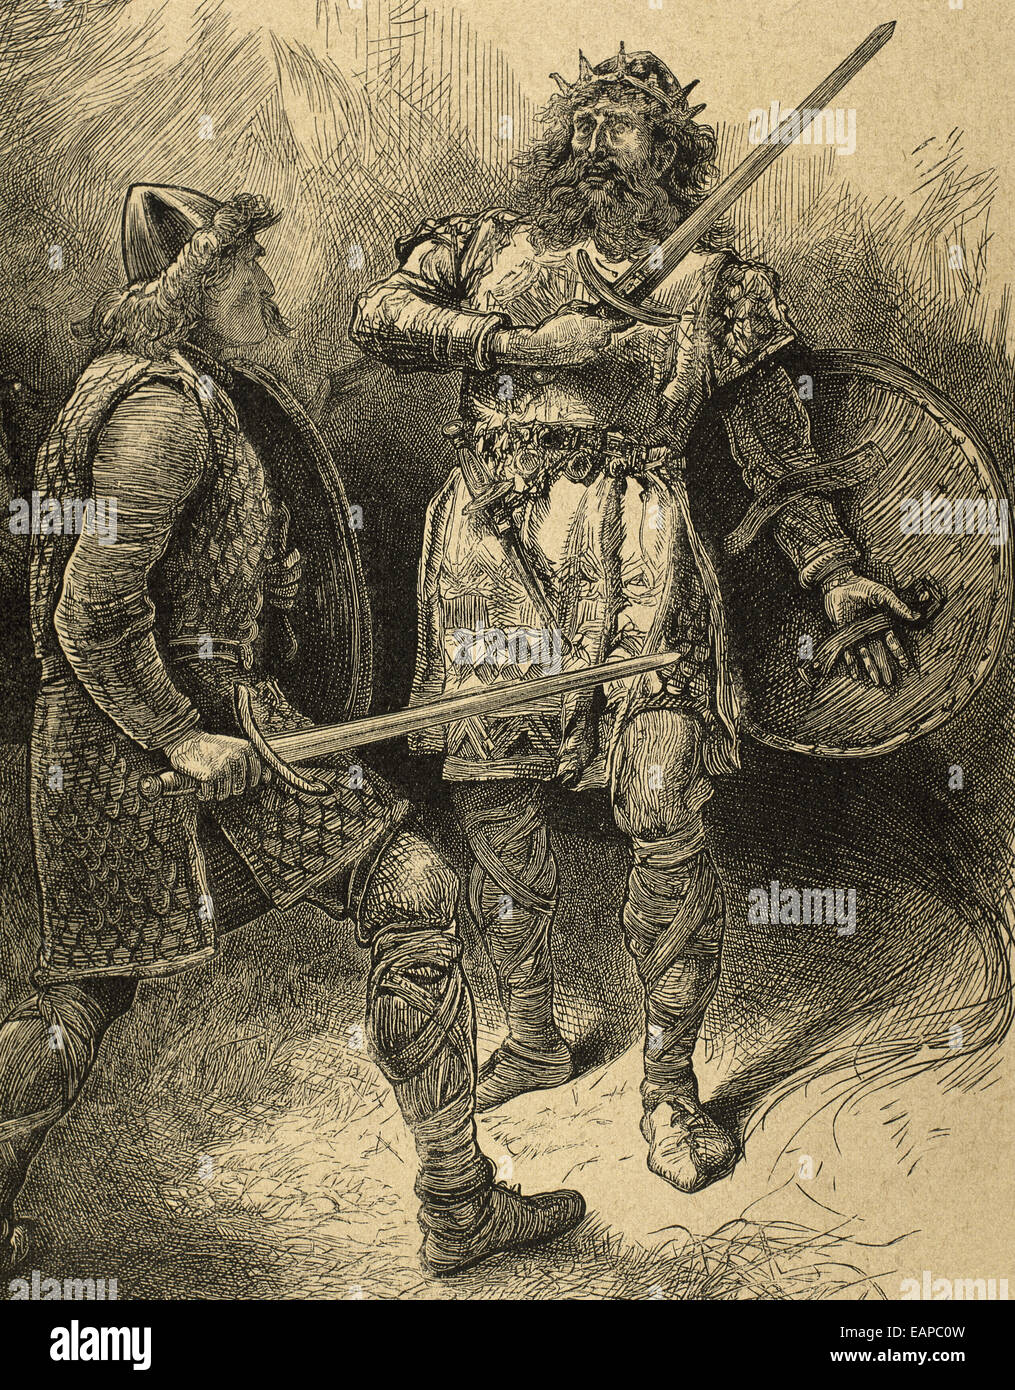 William Shakespeare (1564-1616). English poet. The Tragedy of Macbeth. Macbeth with Macduff. Engraving oby J. Quartley (1886). Stock Photo